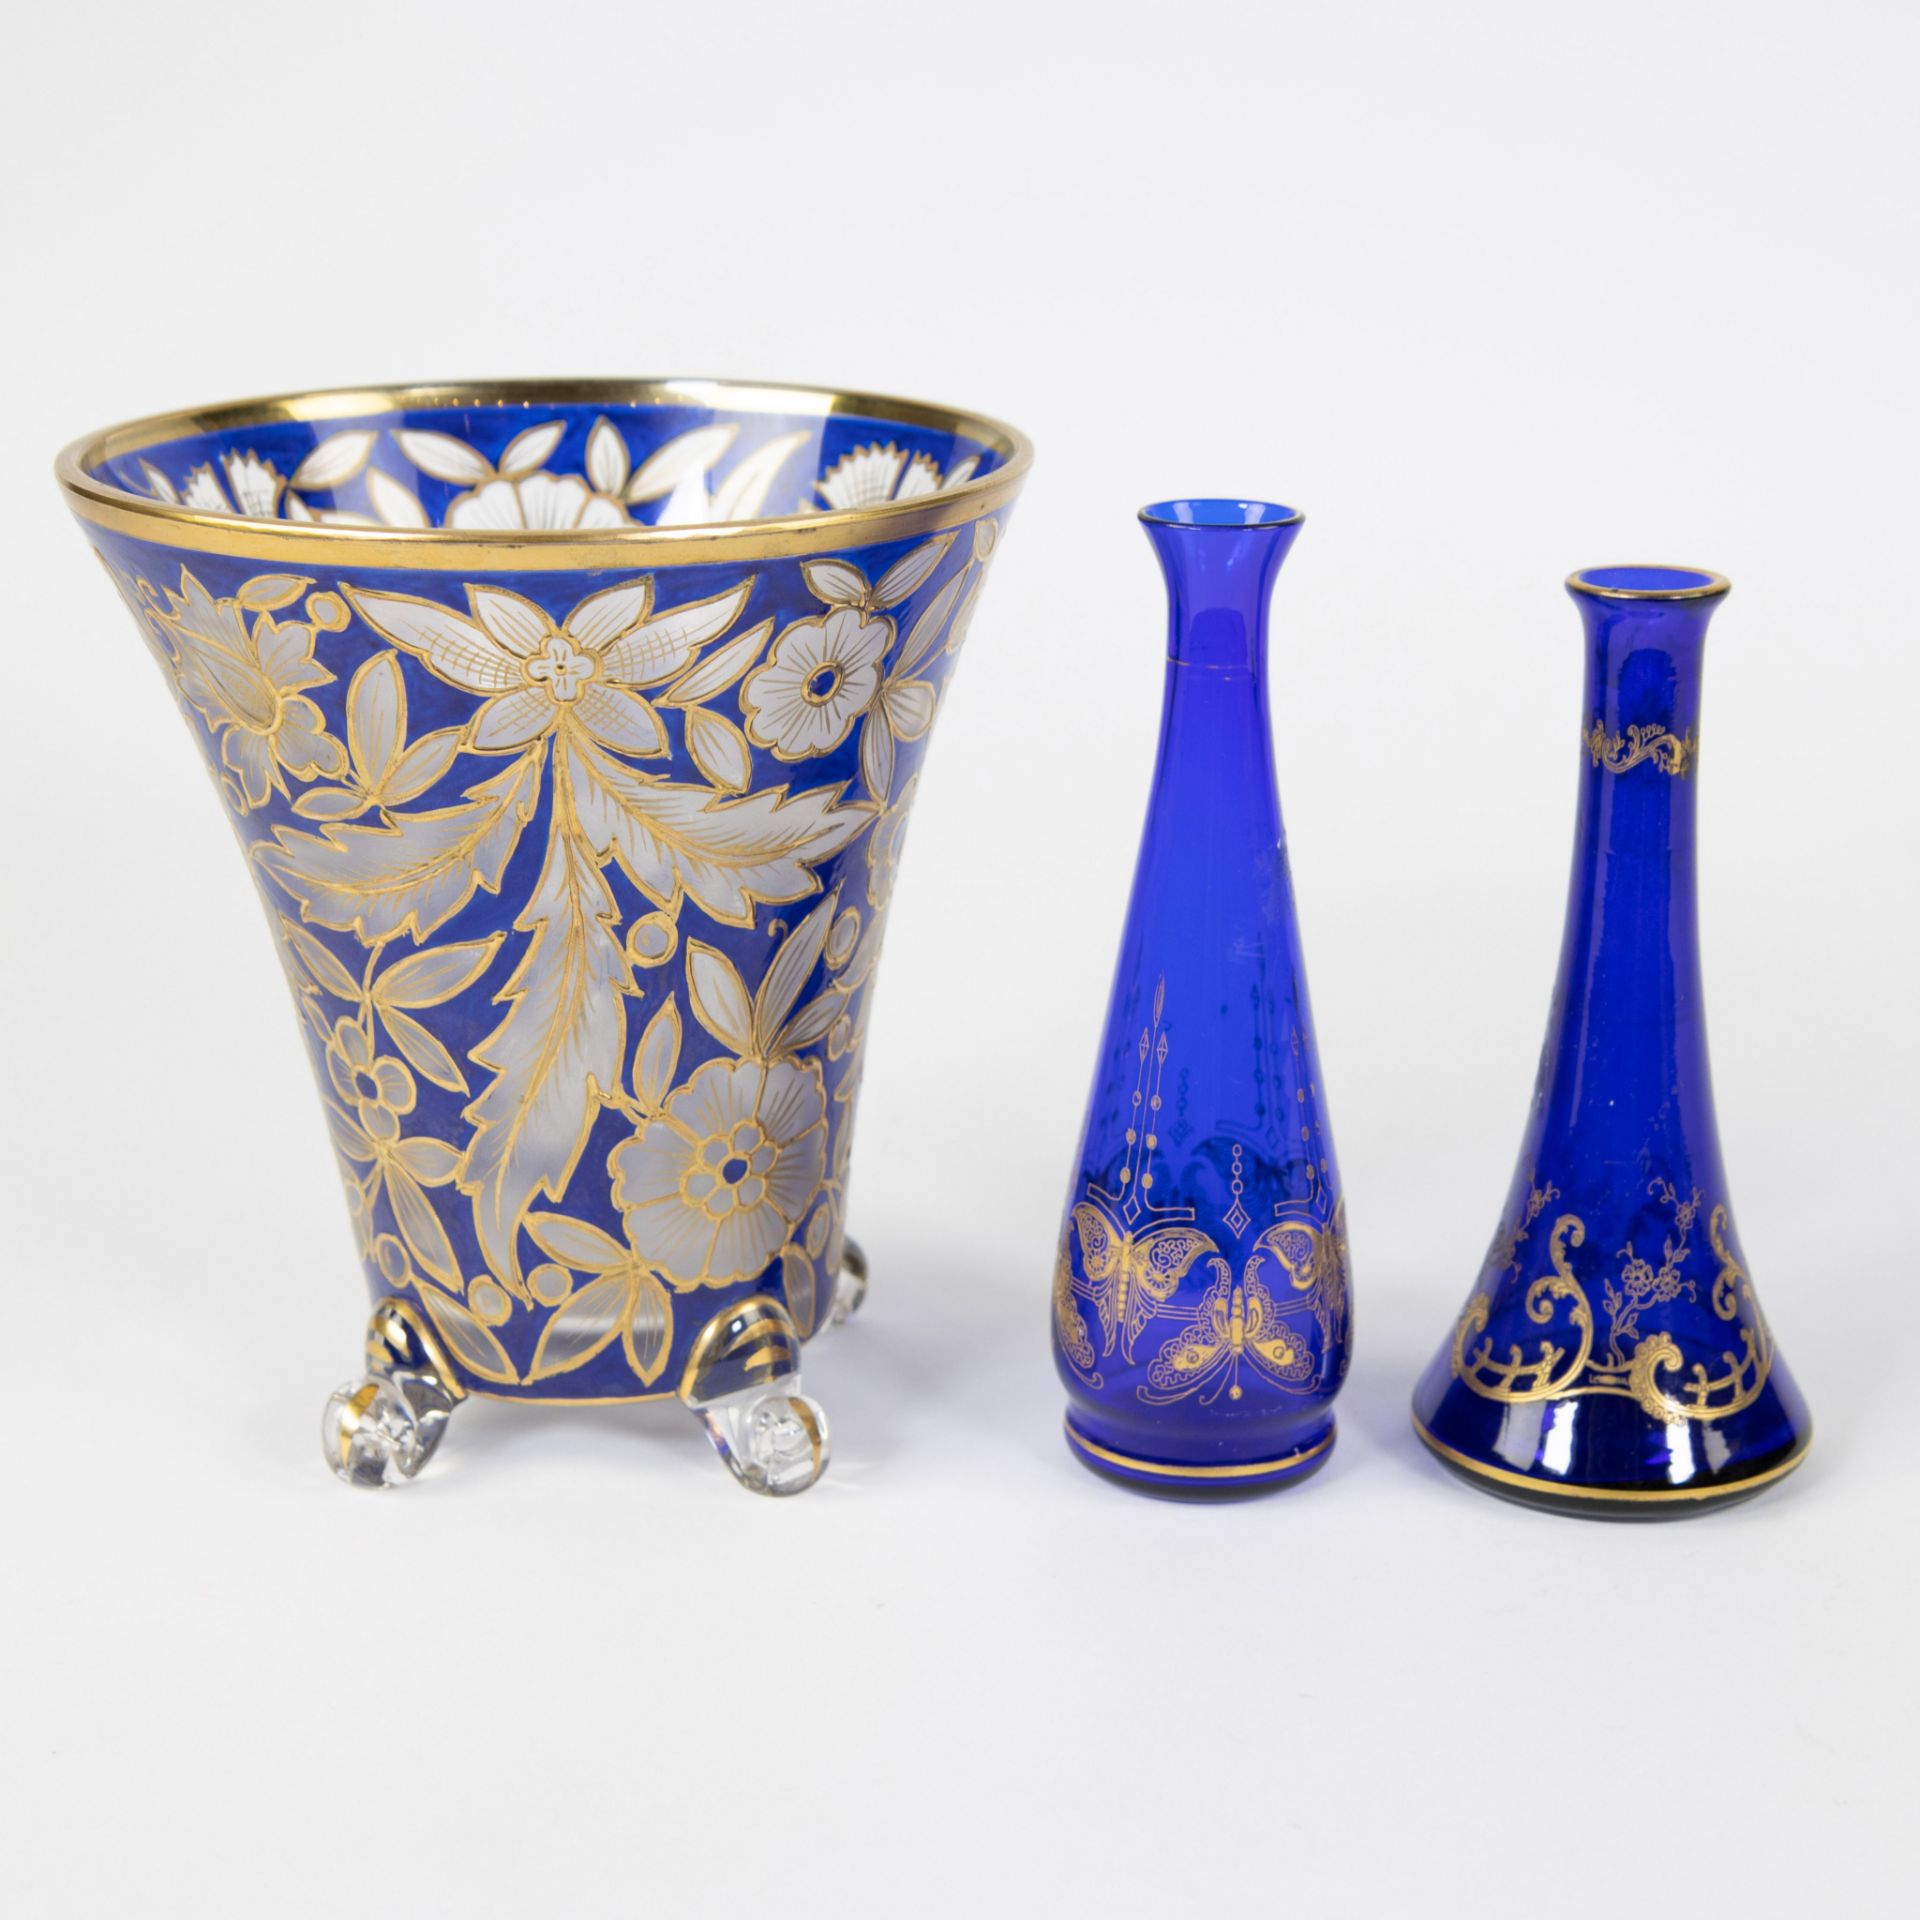 Val Saint Lambert Art Nouveau vase (2) blue with finely decorated decor and 19th century coupe with - Image 4 of 5